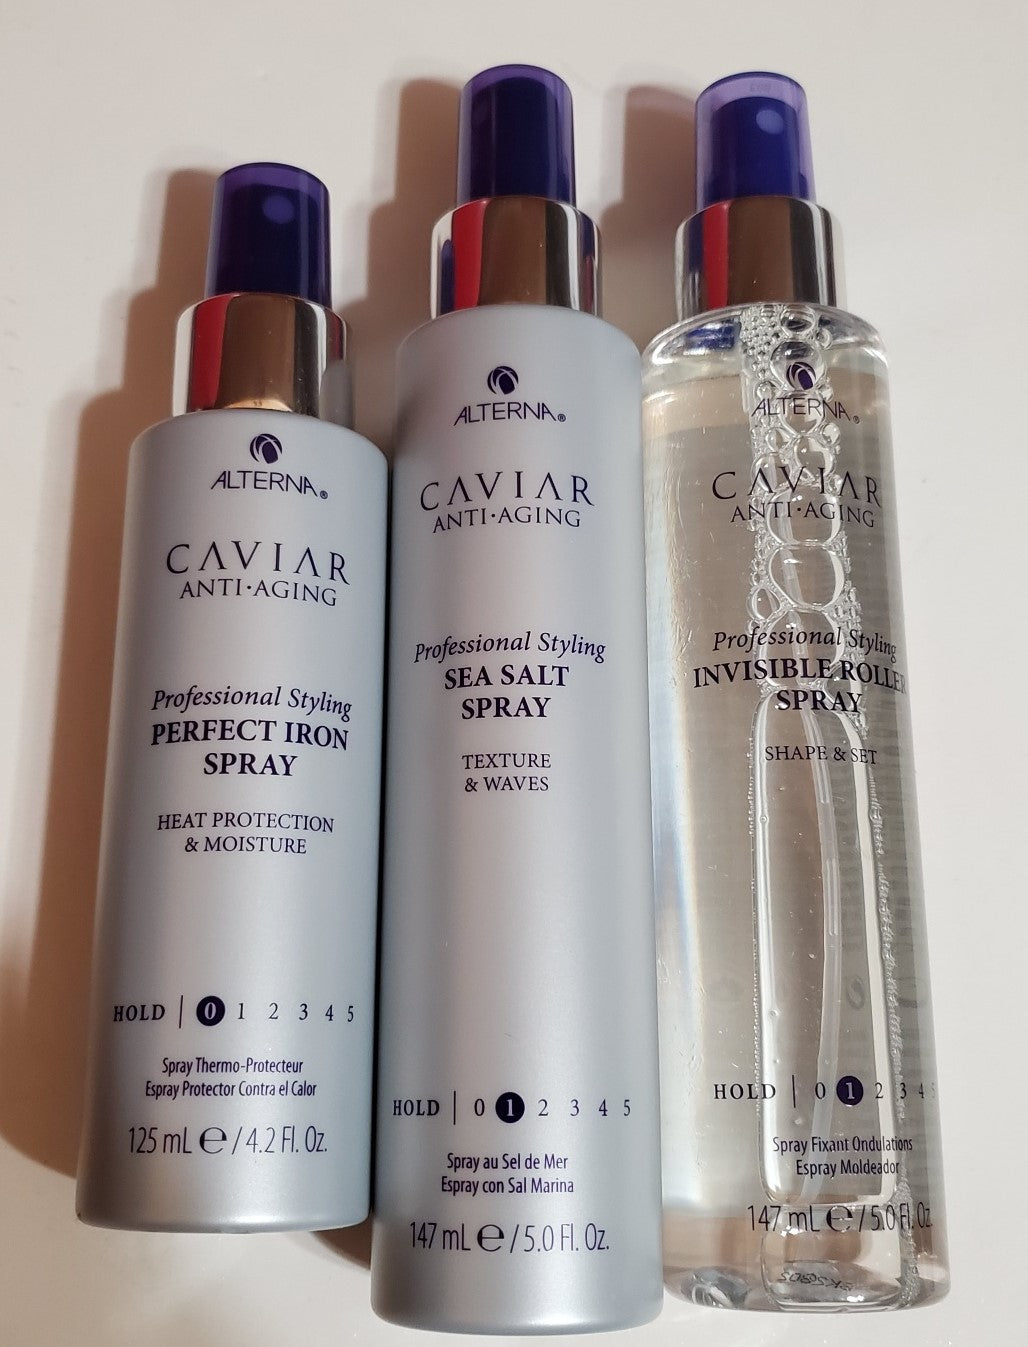 Review, Photos, Hairstyle, Haircare Trend 2019, 2020: Alterna, Caviar Anti-Aging Professional Styling, Invisible Roller Spray, Perfect Iron Spray, Sea Salt Spray, How To Achieve Great Hair